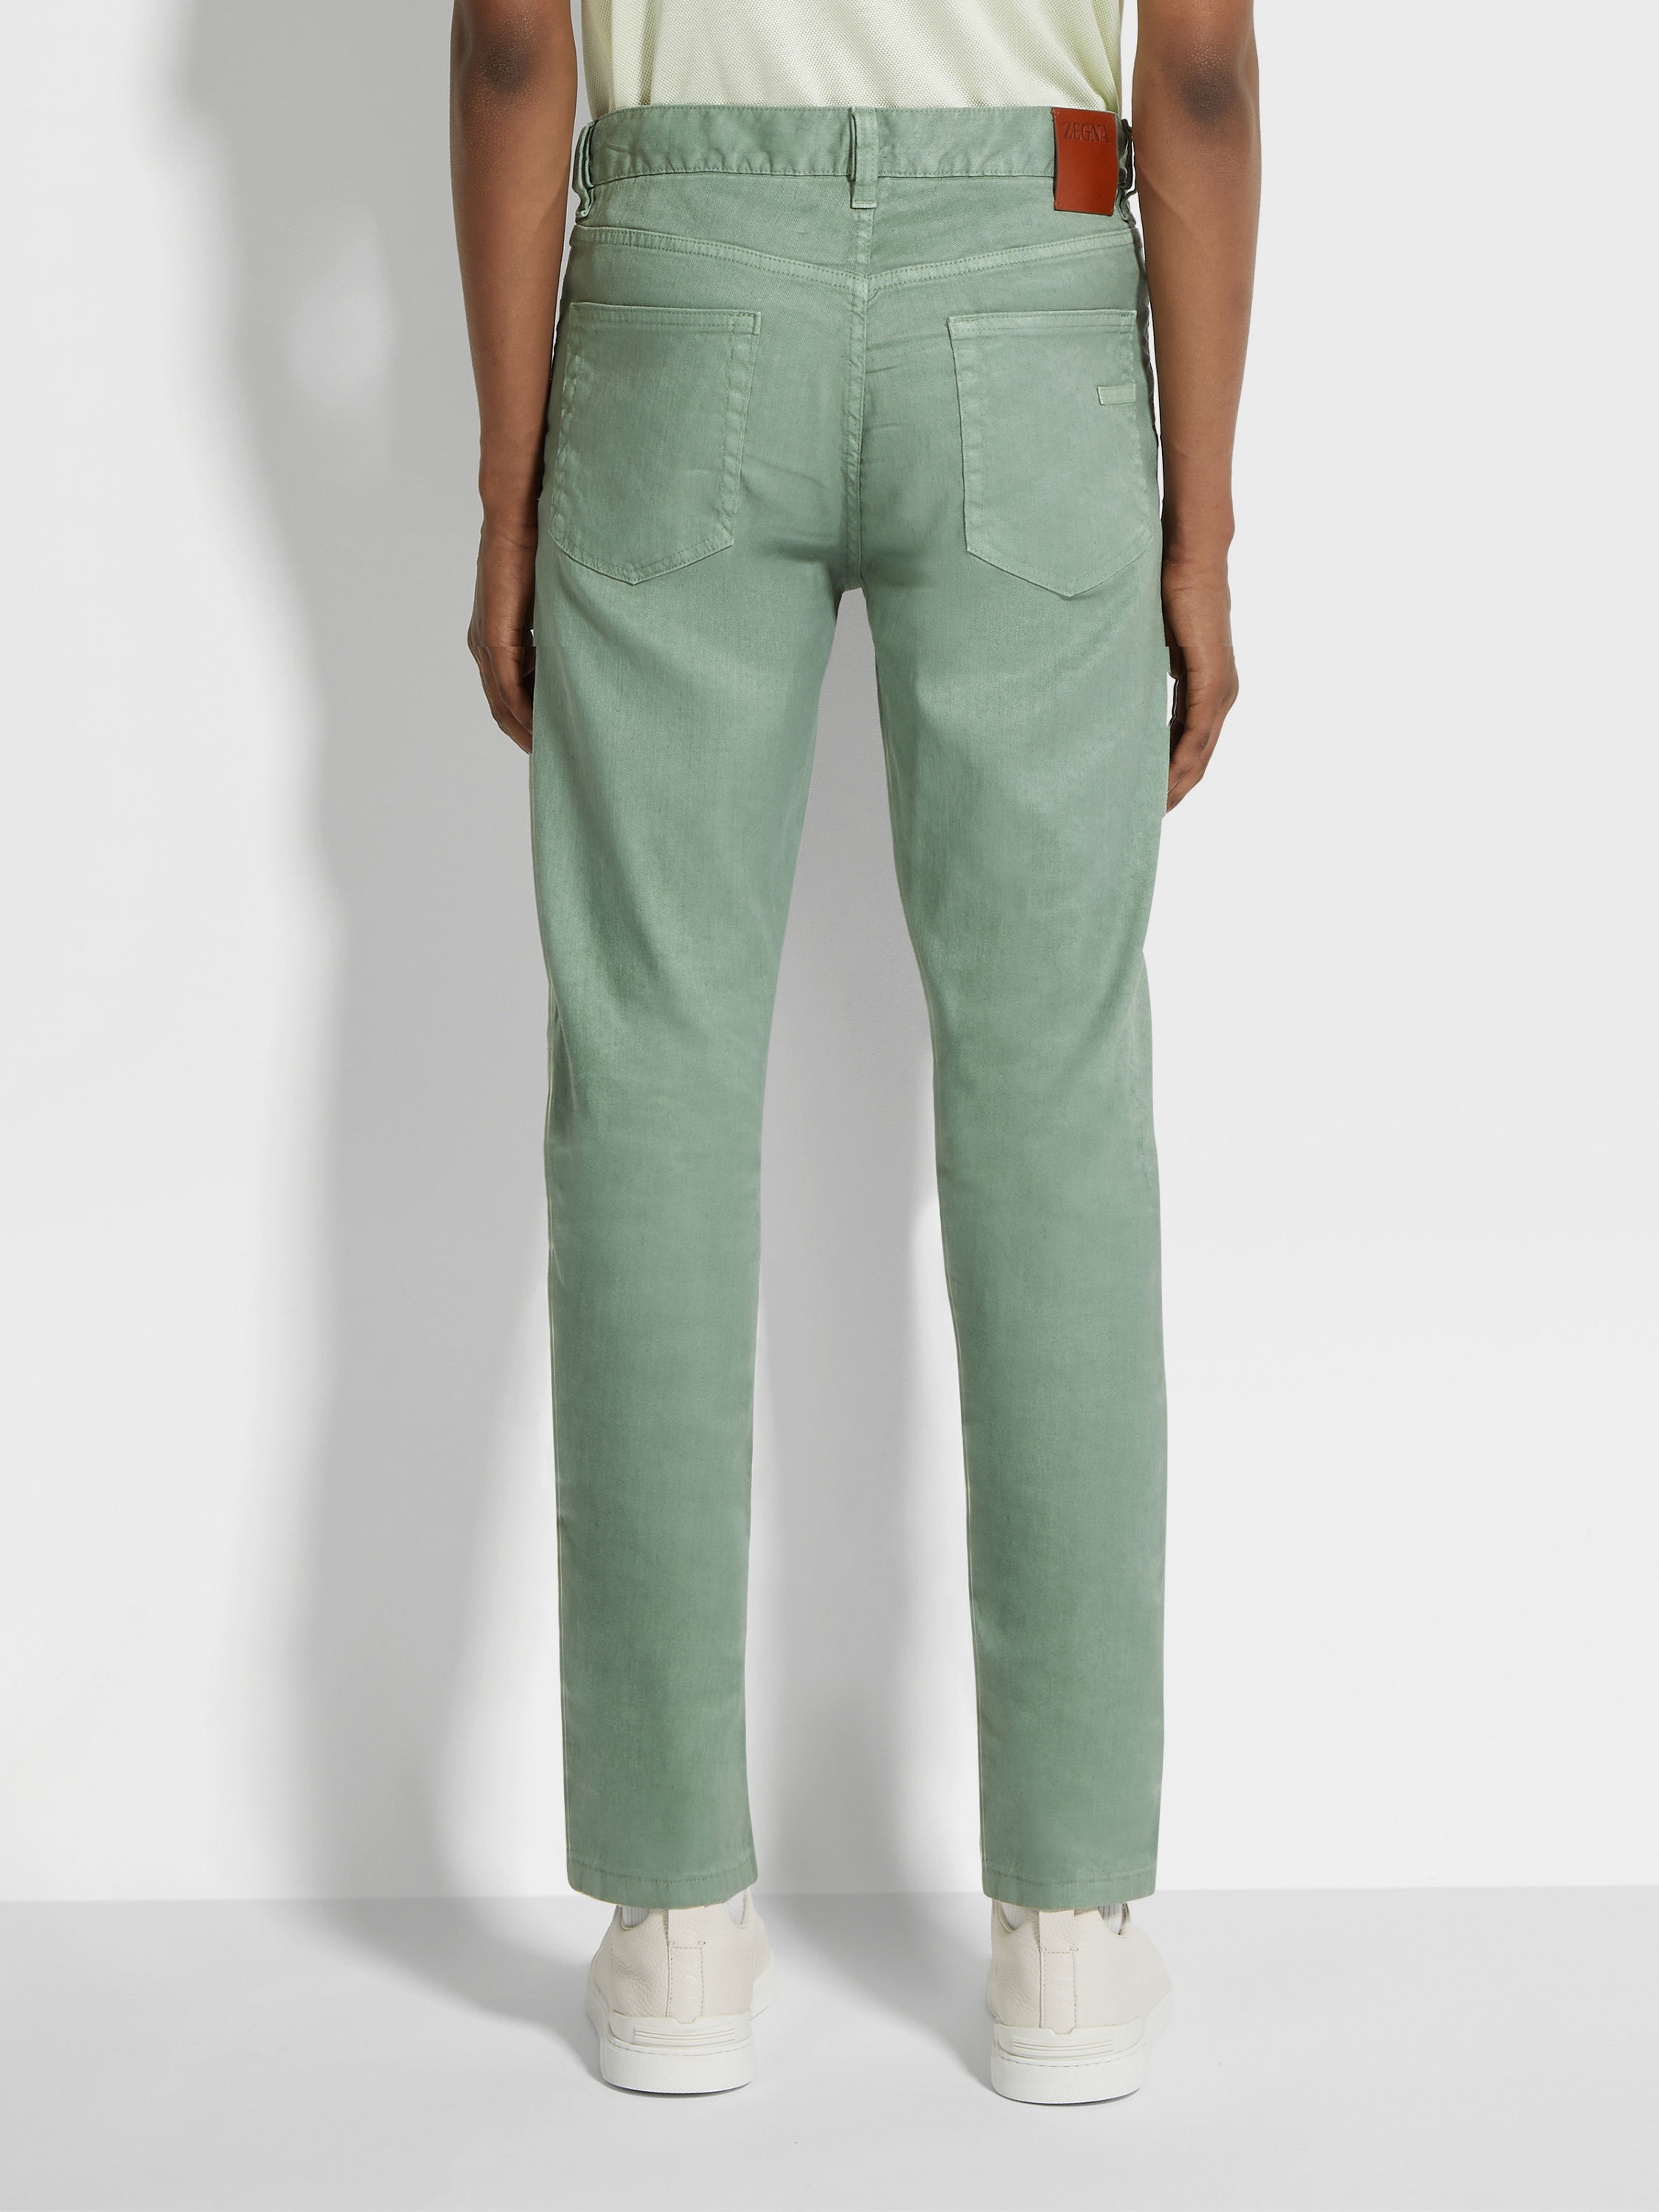 SAGE GREEN STRETCH LINEN AND COTTON ROCCIA JEANS - 5